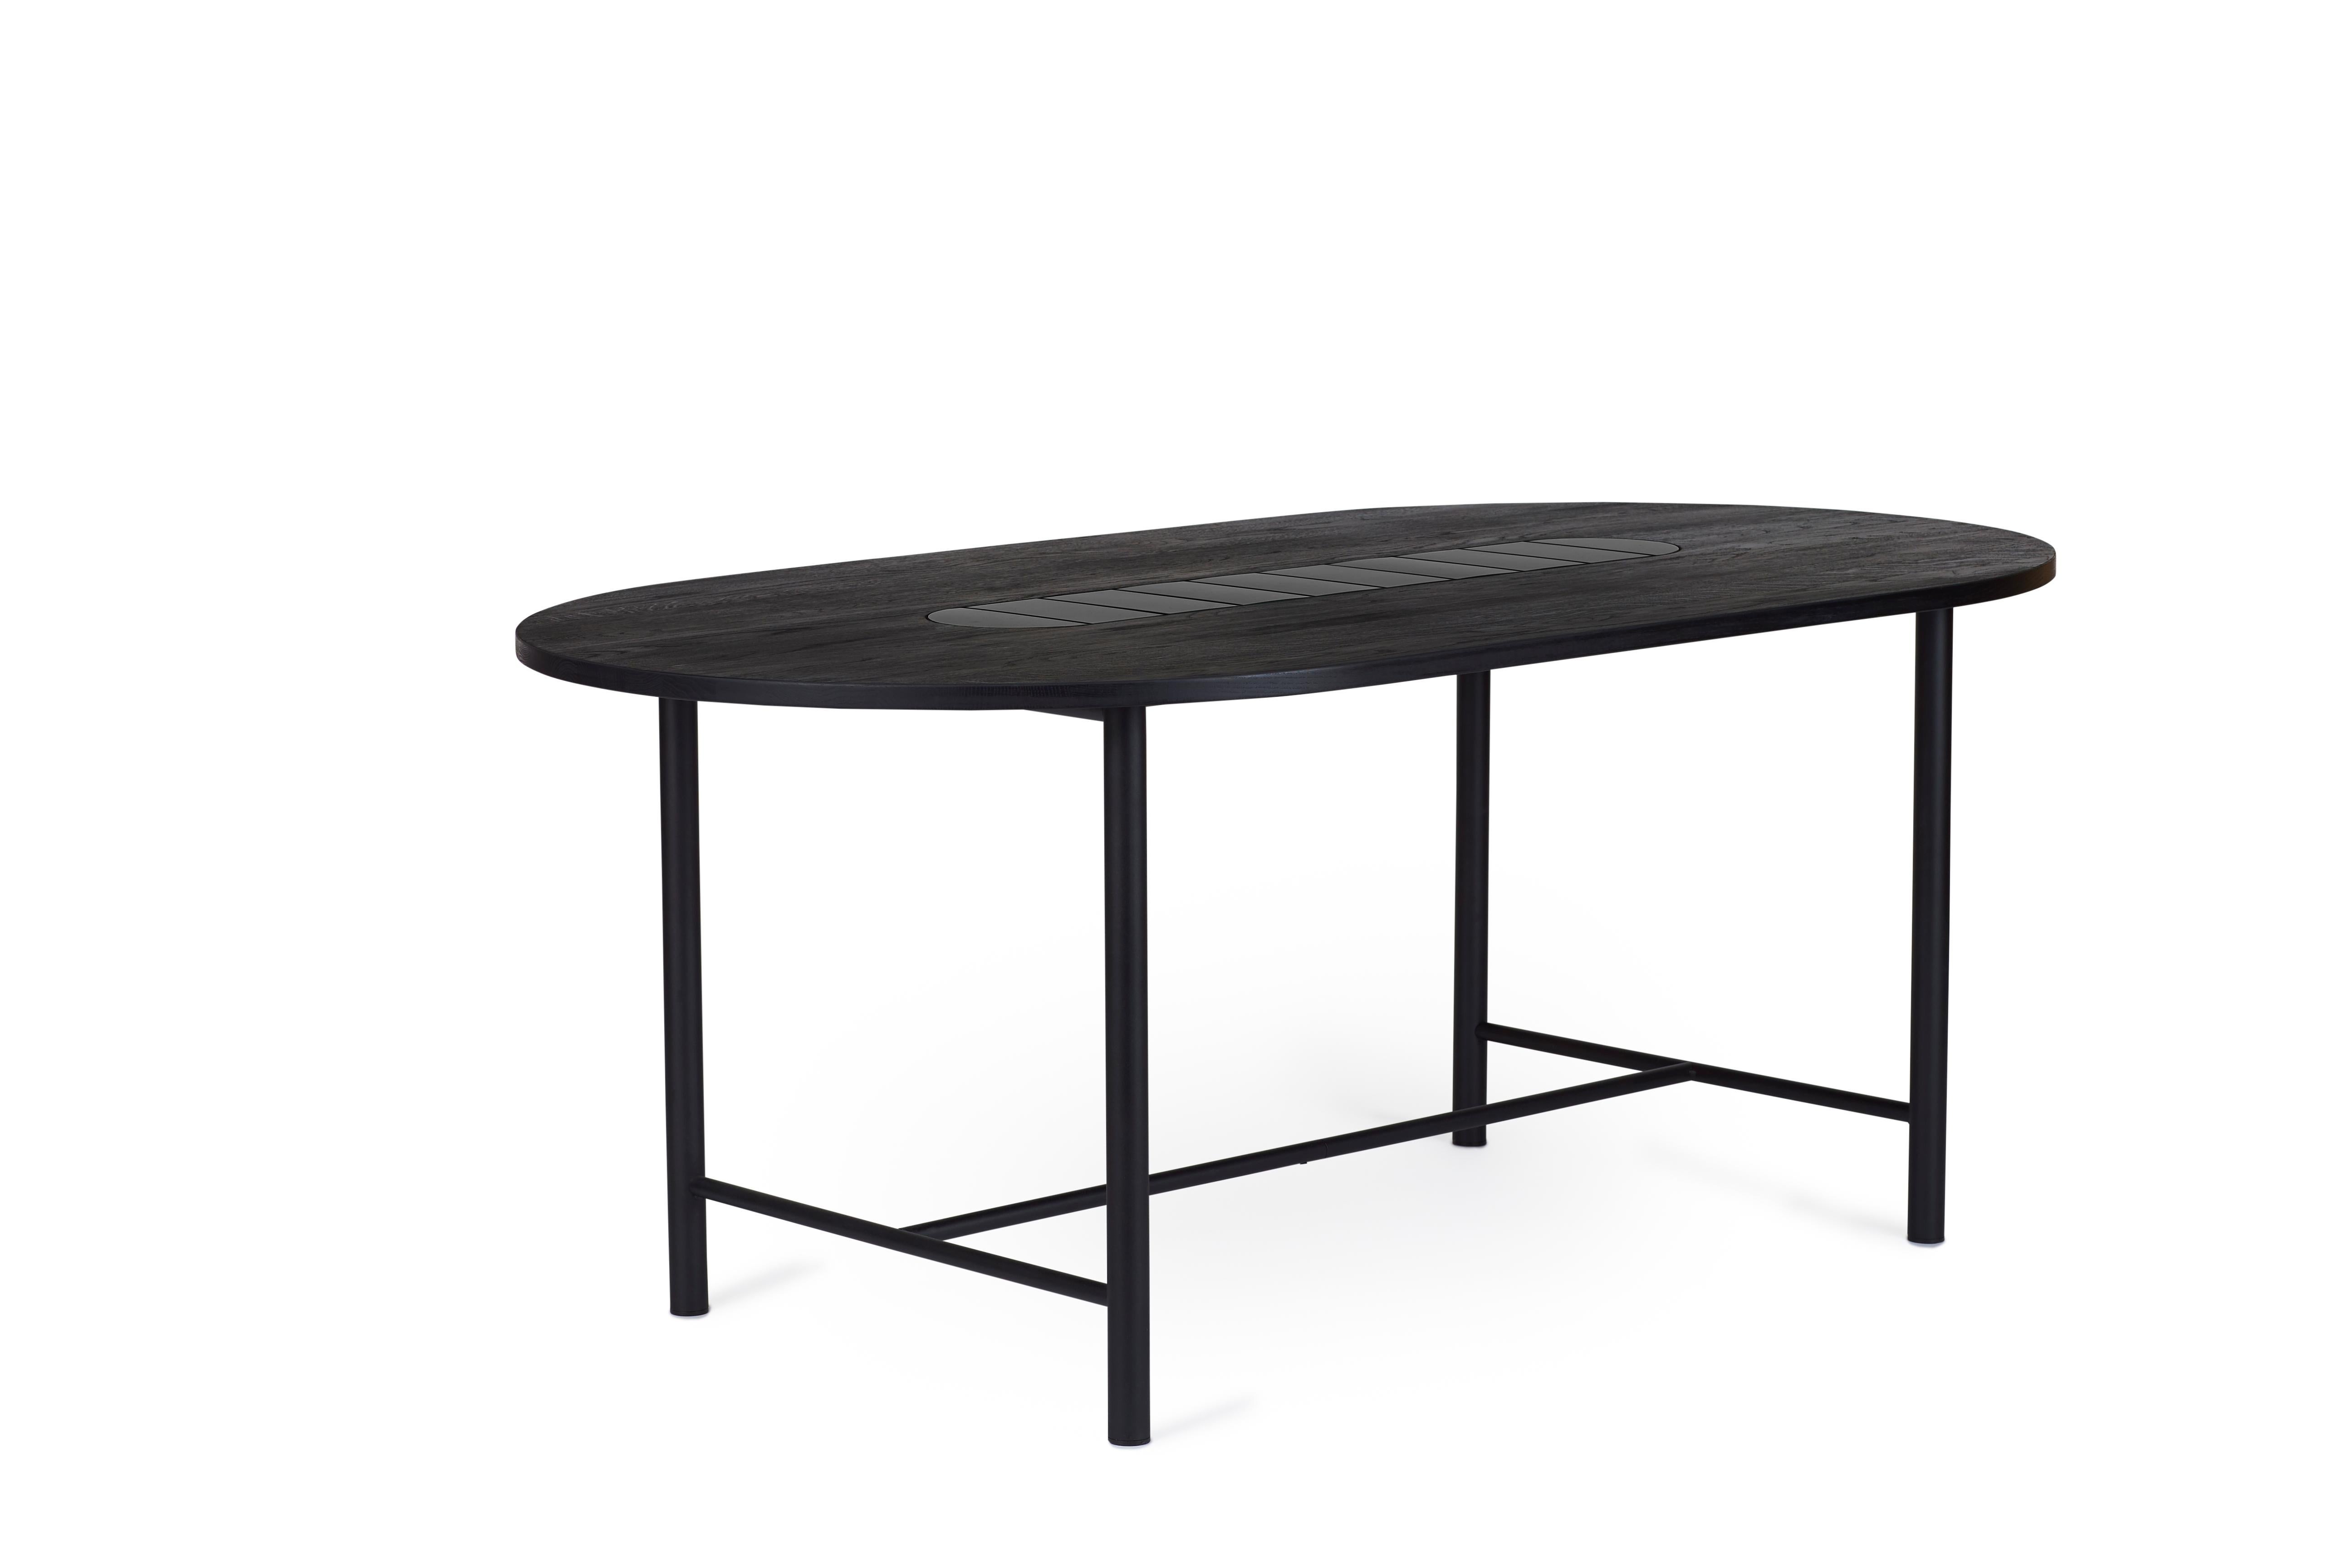 For Sale: Black (Soft black) Be My Guest Small Dining Table, by Charlotte Høncke from Warm Nordic 2